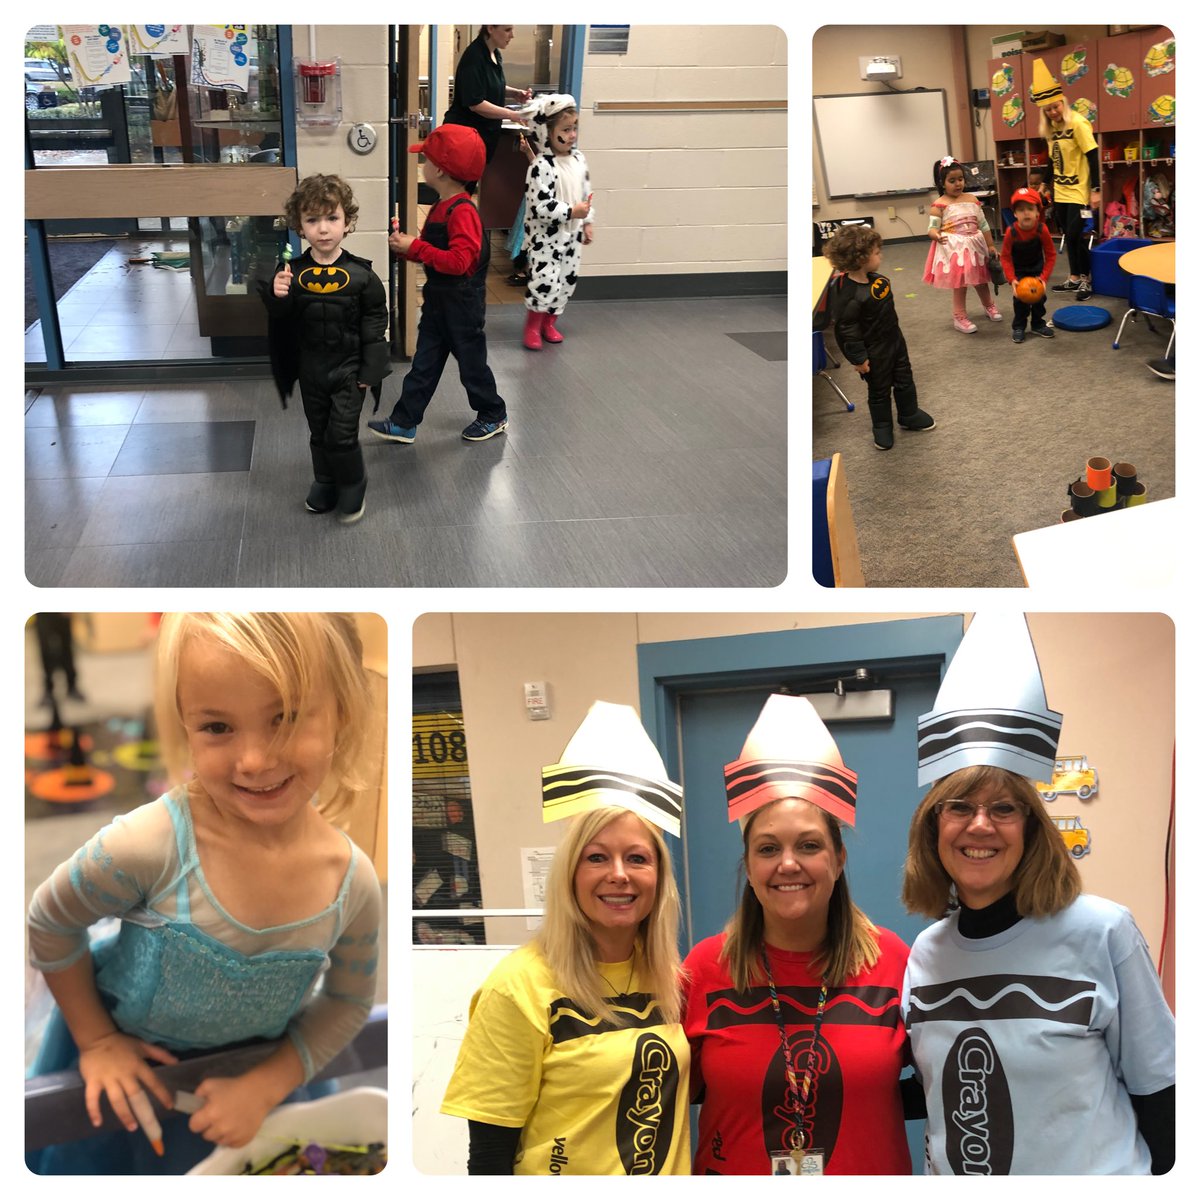 Great day with preschool fall parties! Thanks to our awesome parents who made our parties so fun! #costumes #fallparty